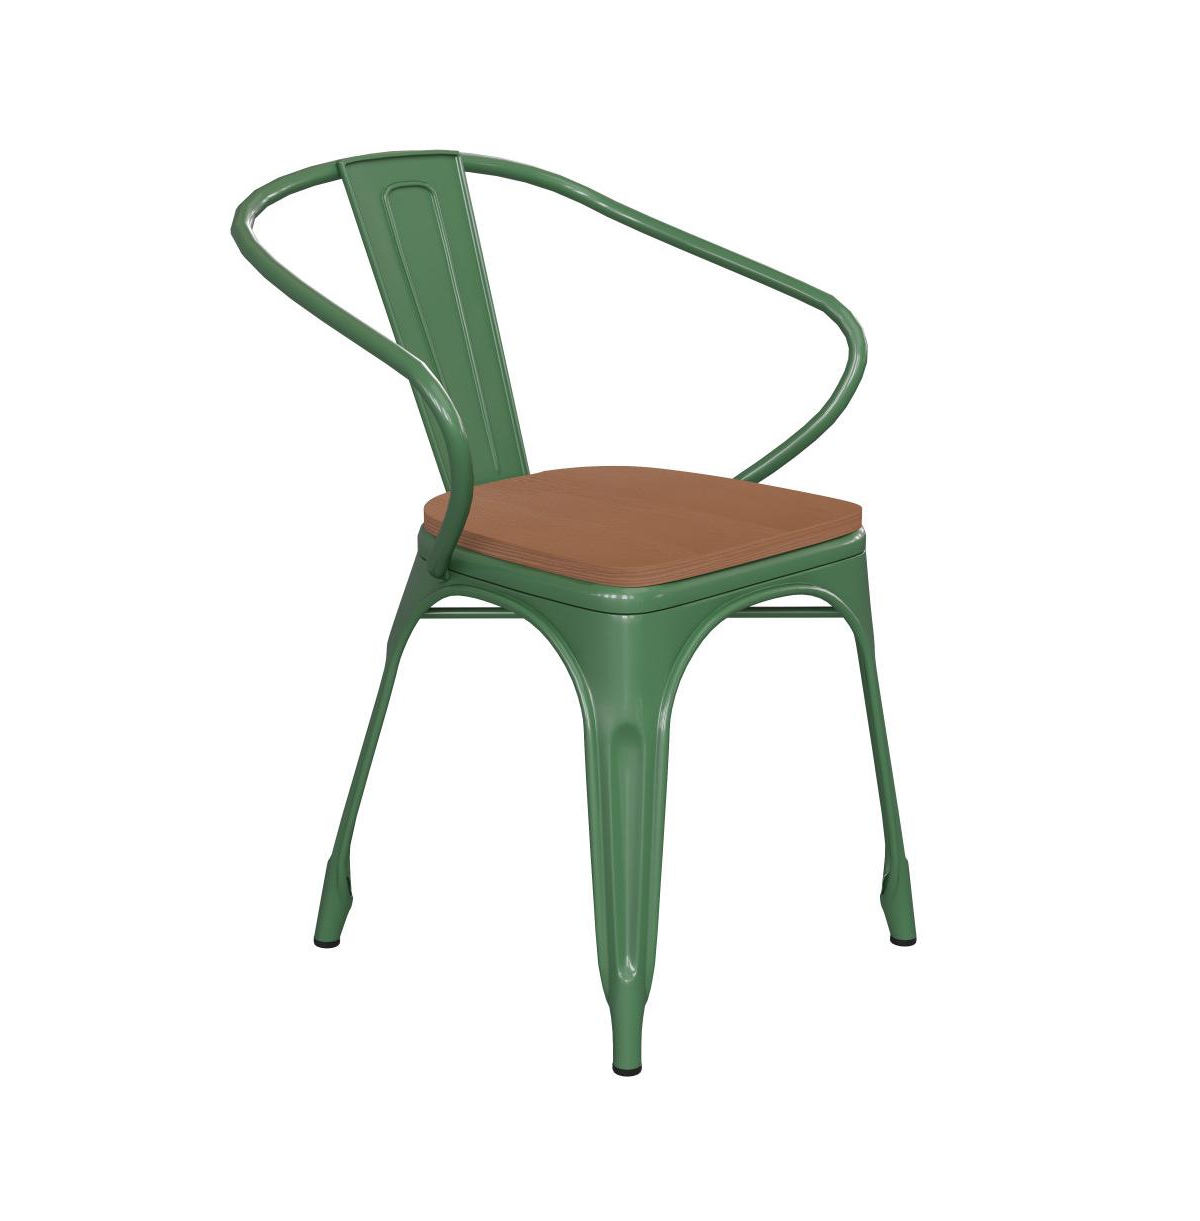 Emma+oliver Alva Metal Indoor-outdoor Stacking Chair With Vertical Slat Back, Arms And All-weather Polystyrene S In Green,teak